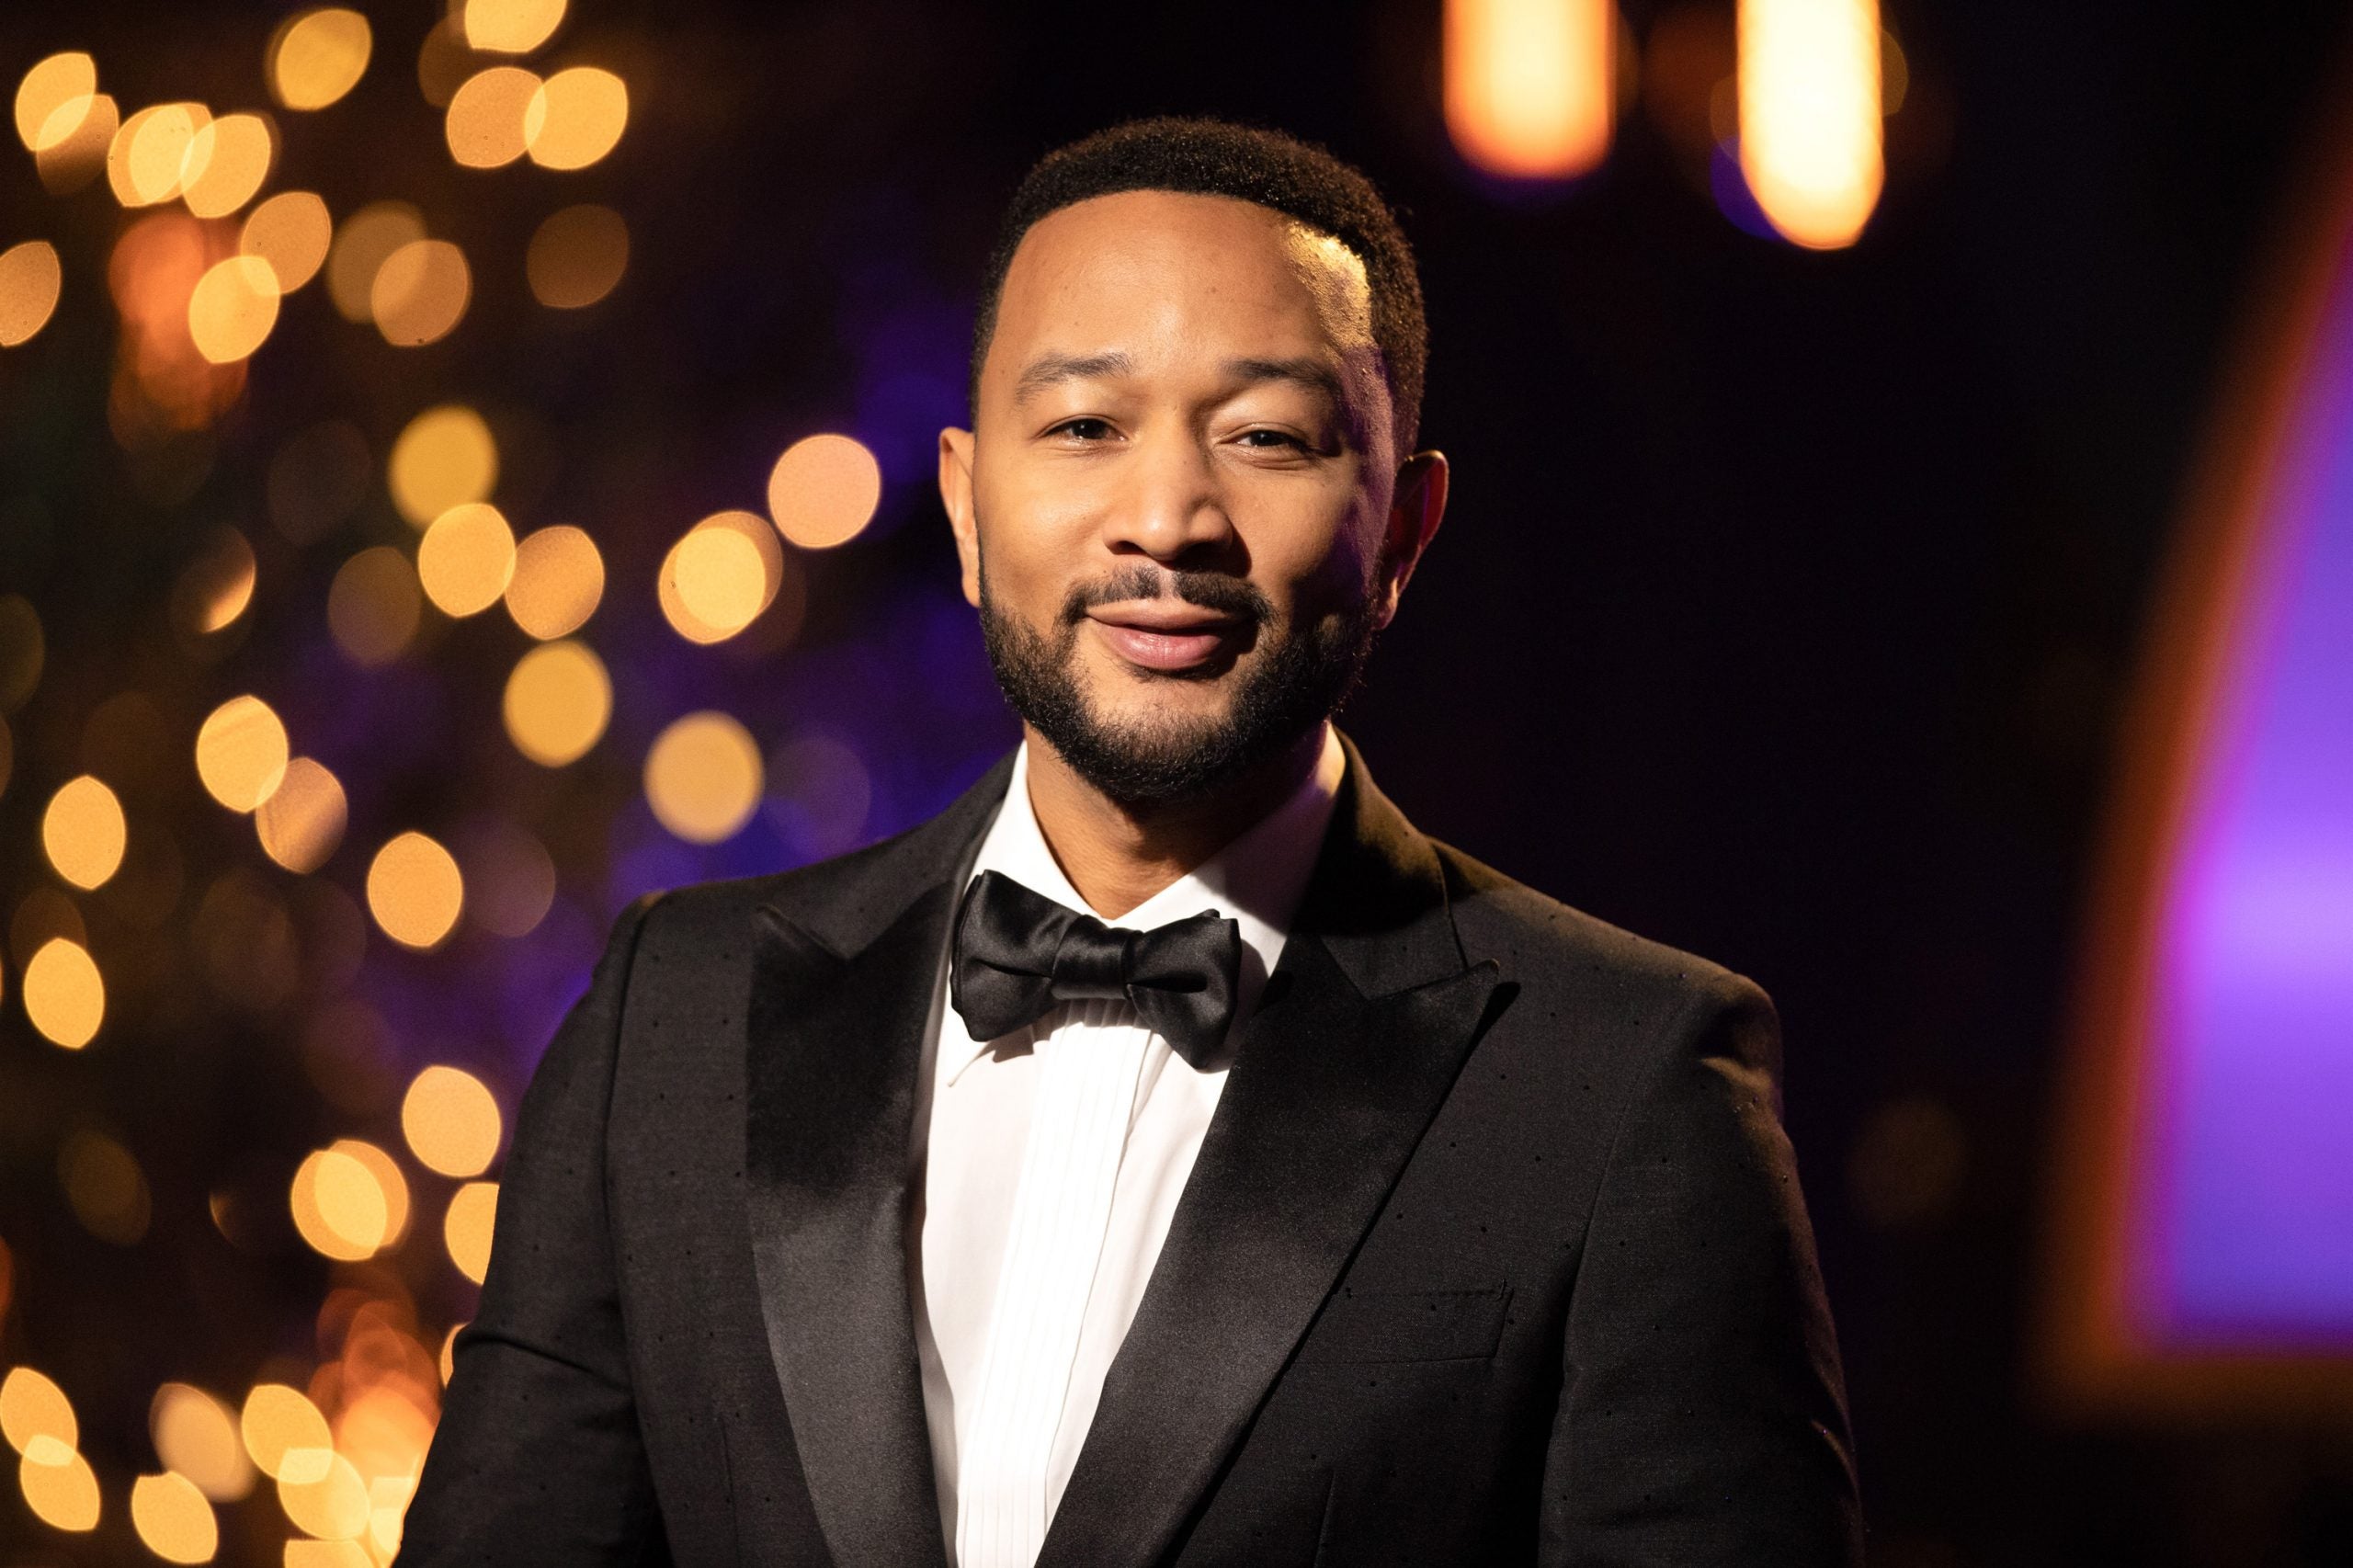 John Legend Got His COVID-19 Vaccine And Wants You To Get Yours, Too: “We Finally Have A Reason For Optimism”